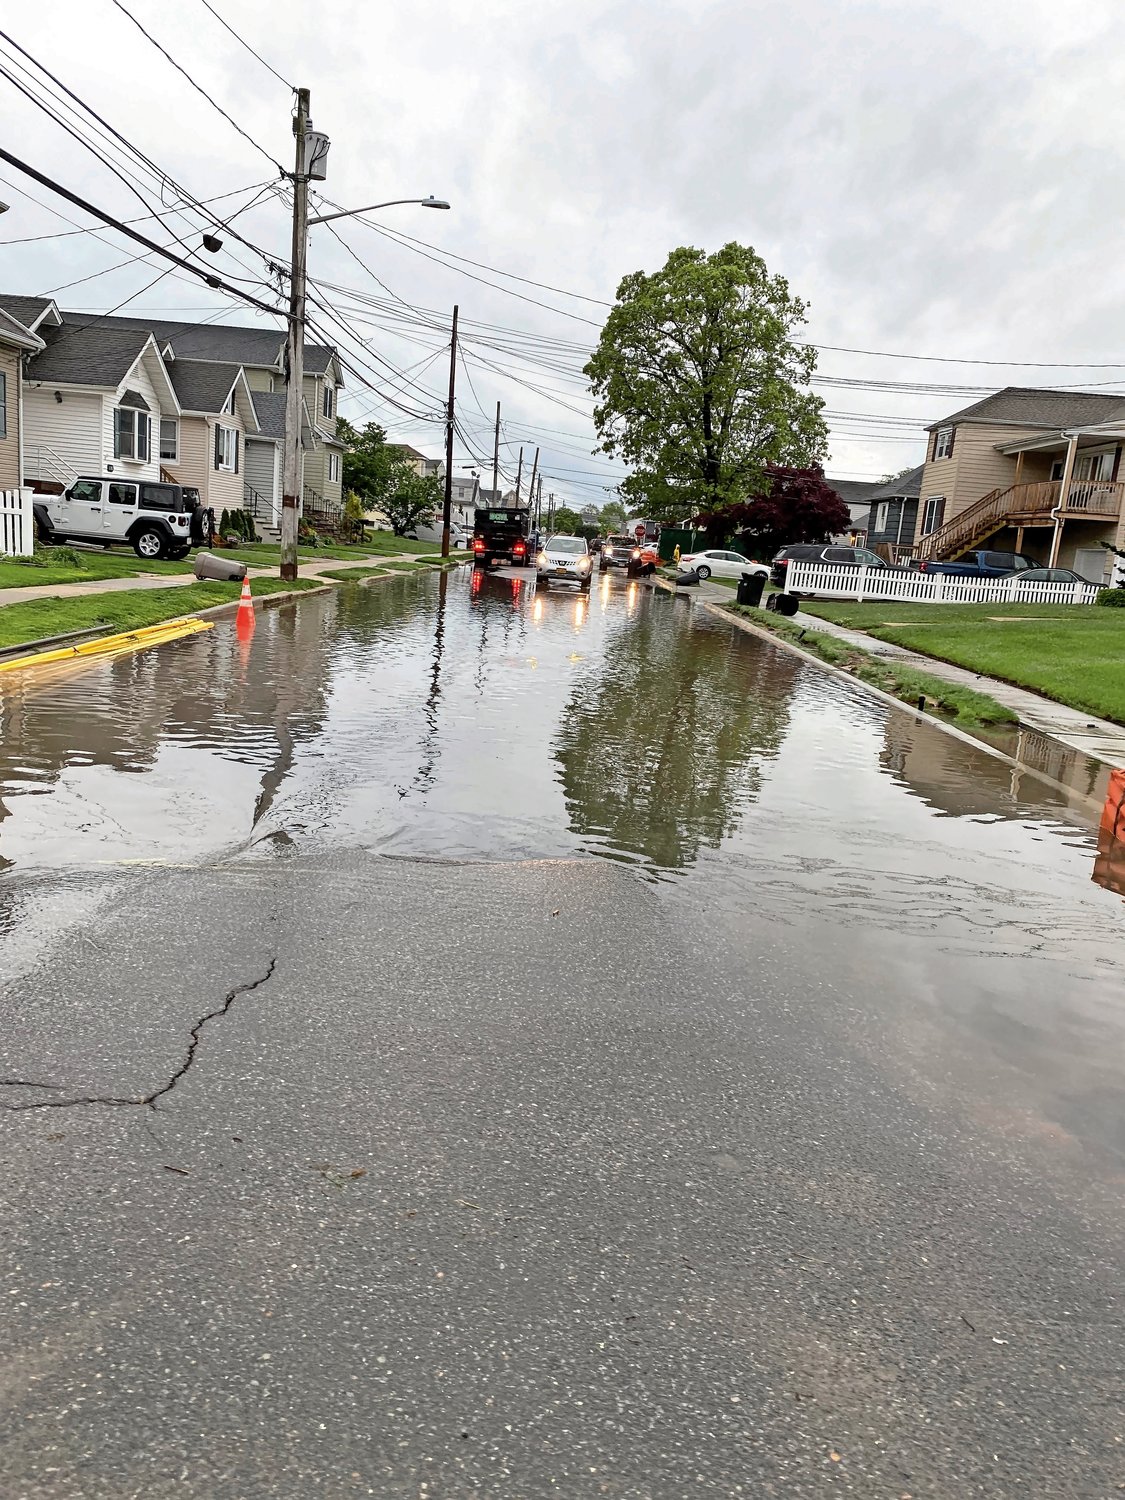 Resident Alison Castardi said that flooding on Lawson Avenue was never like this before the project started in 2020.